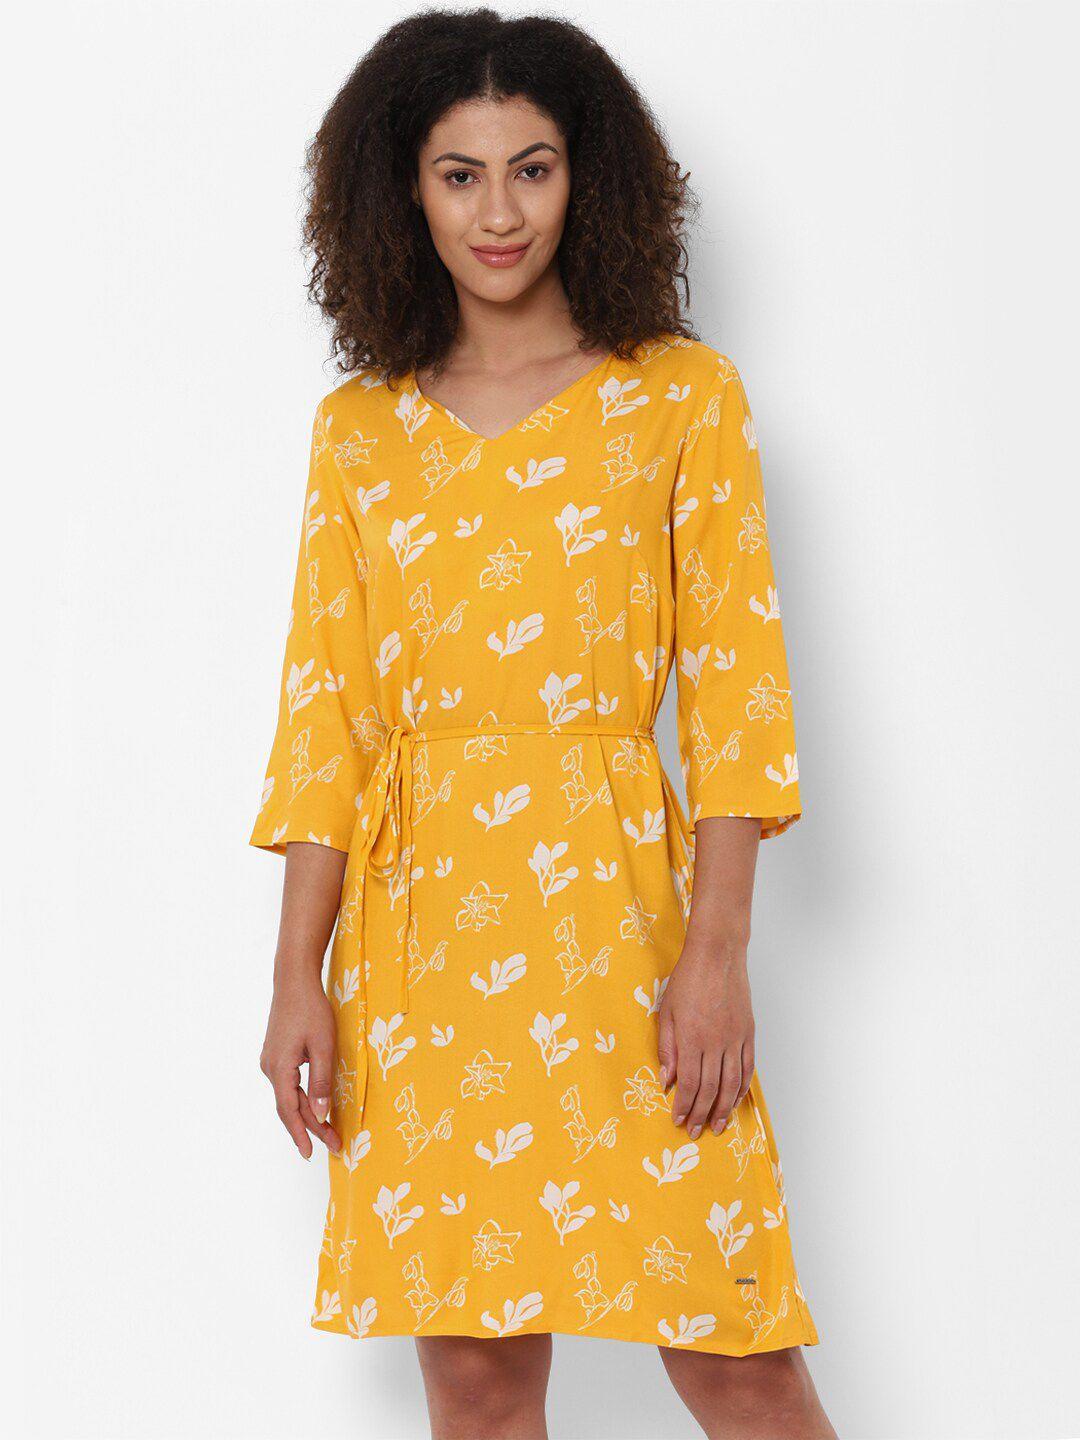 allen solly woman yellow floral a-line dress